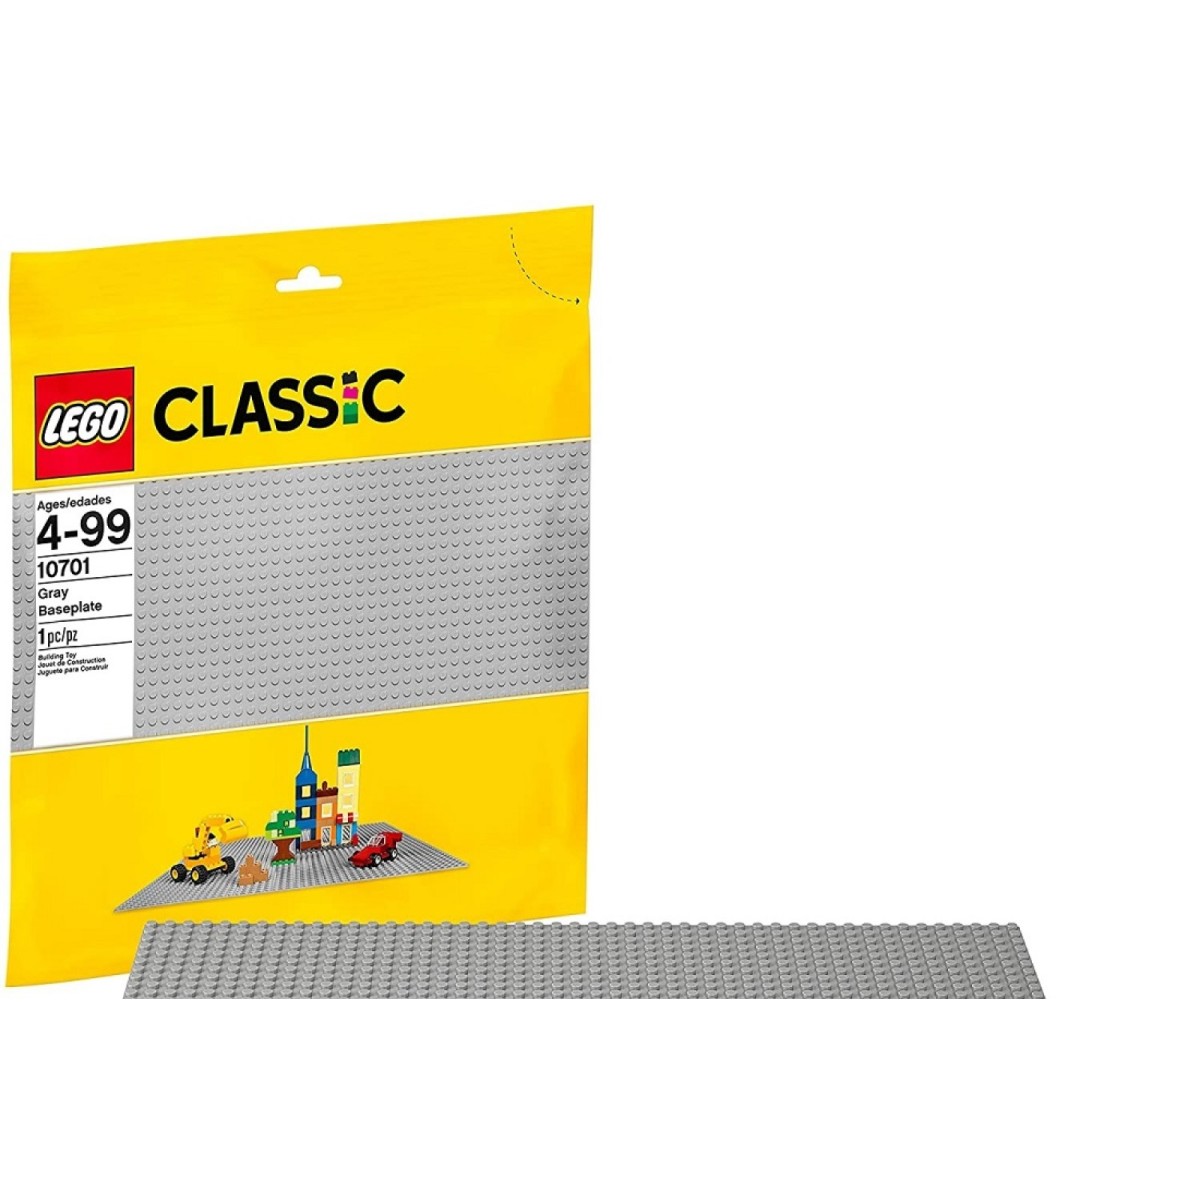 LEGO 11024 Classic Grey Baseplate, Construction Toy for Kids 48x48